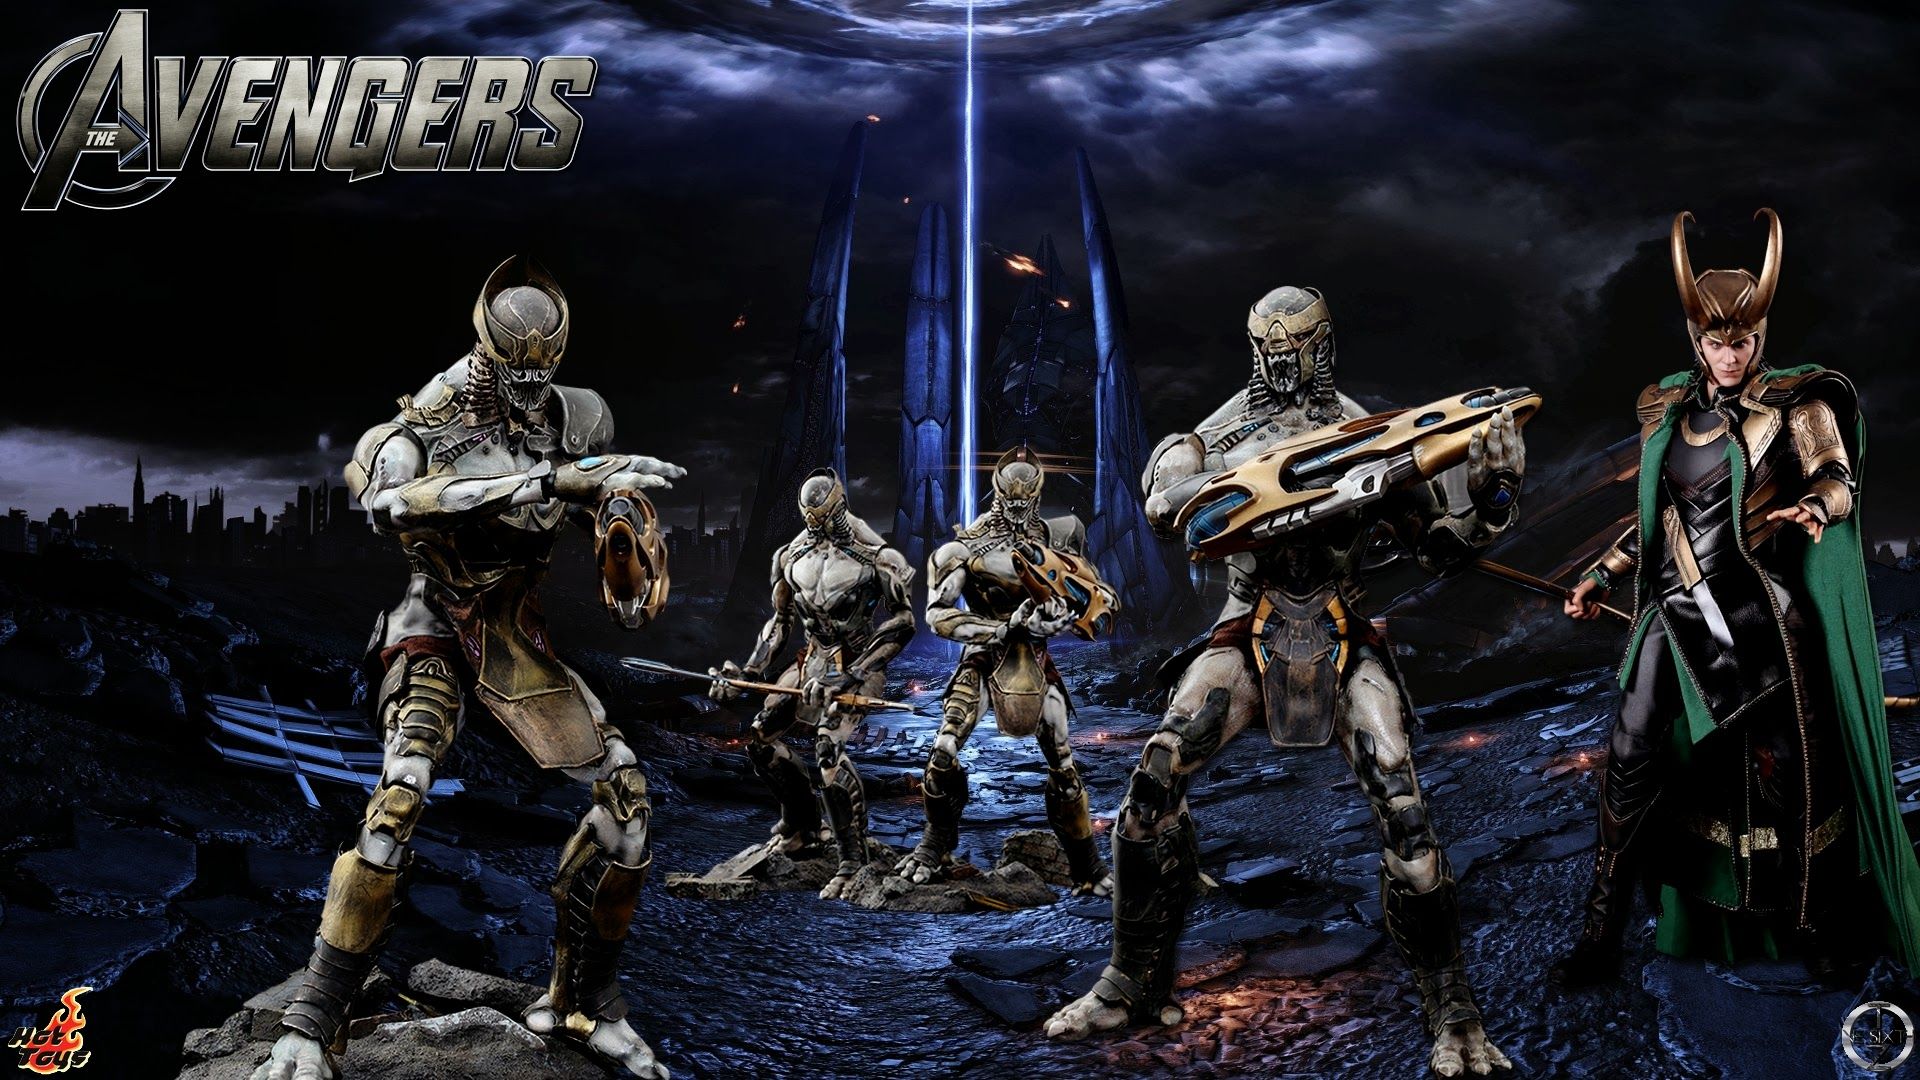 Chitauri Soldiers Avengers Toys Full HD Wallpaper Robber Image, Picture, Photo, Icon and Wallpaper: Ravepad place to rave about anything and everything!